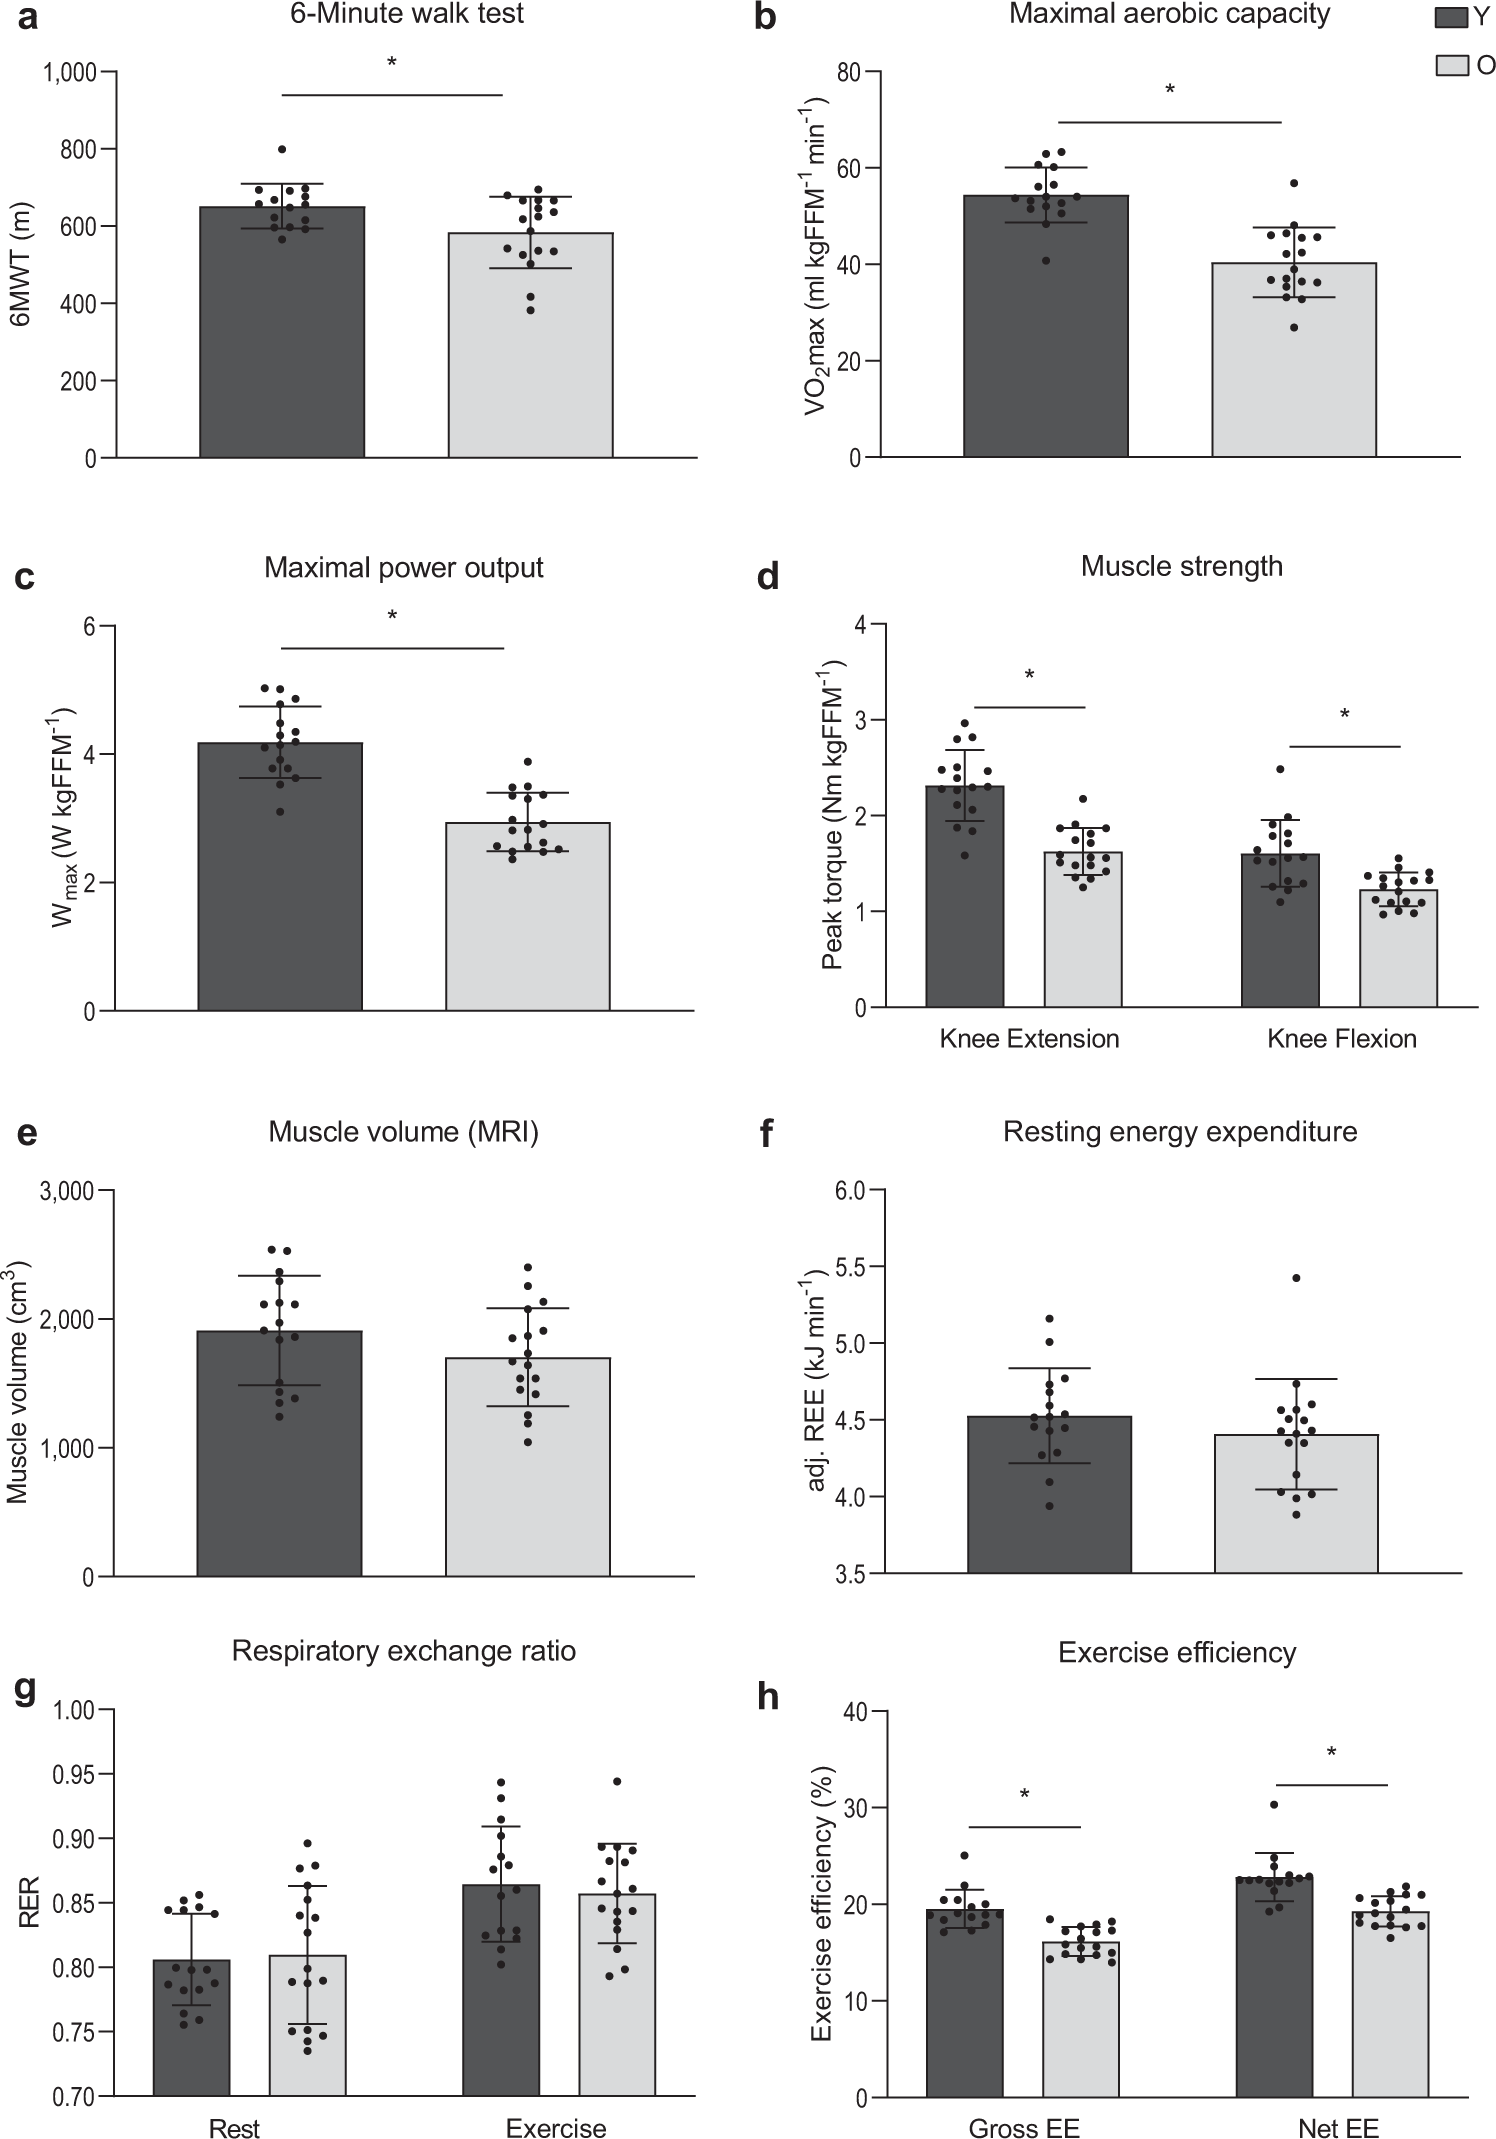 Skibform salat kubiske Impact of aging and exercise on skeletal muscle mitochondrial capacity,  energy metabolism, and physical function | Nature Communications